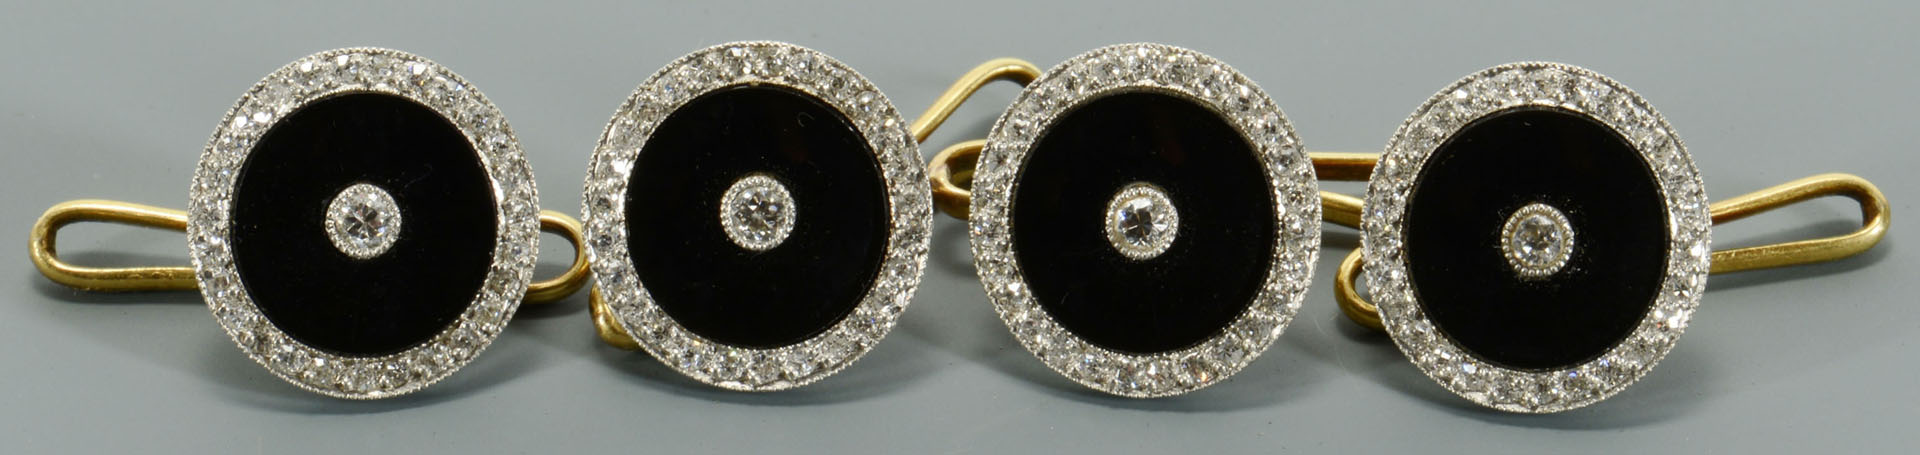 Lot 116: 4 onyx and gold Dress Studs, retailed by Tiffany